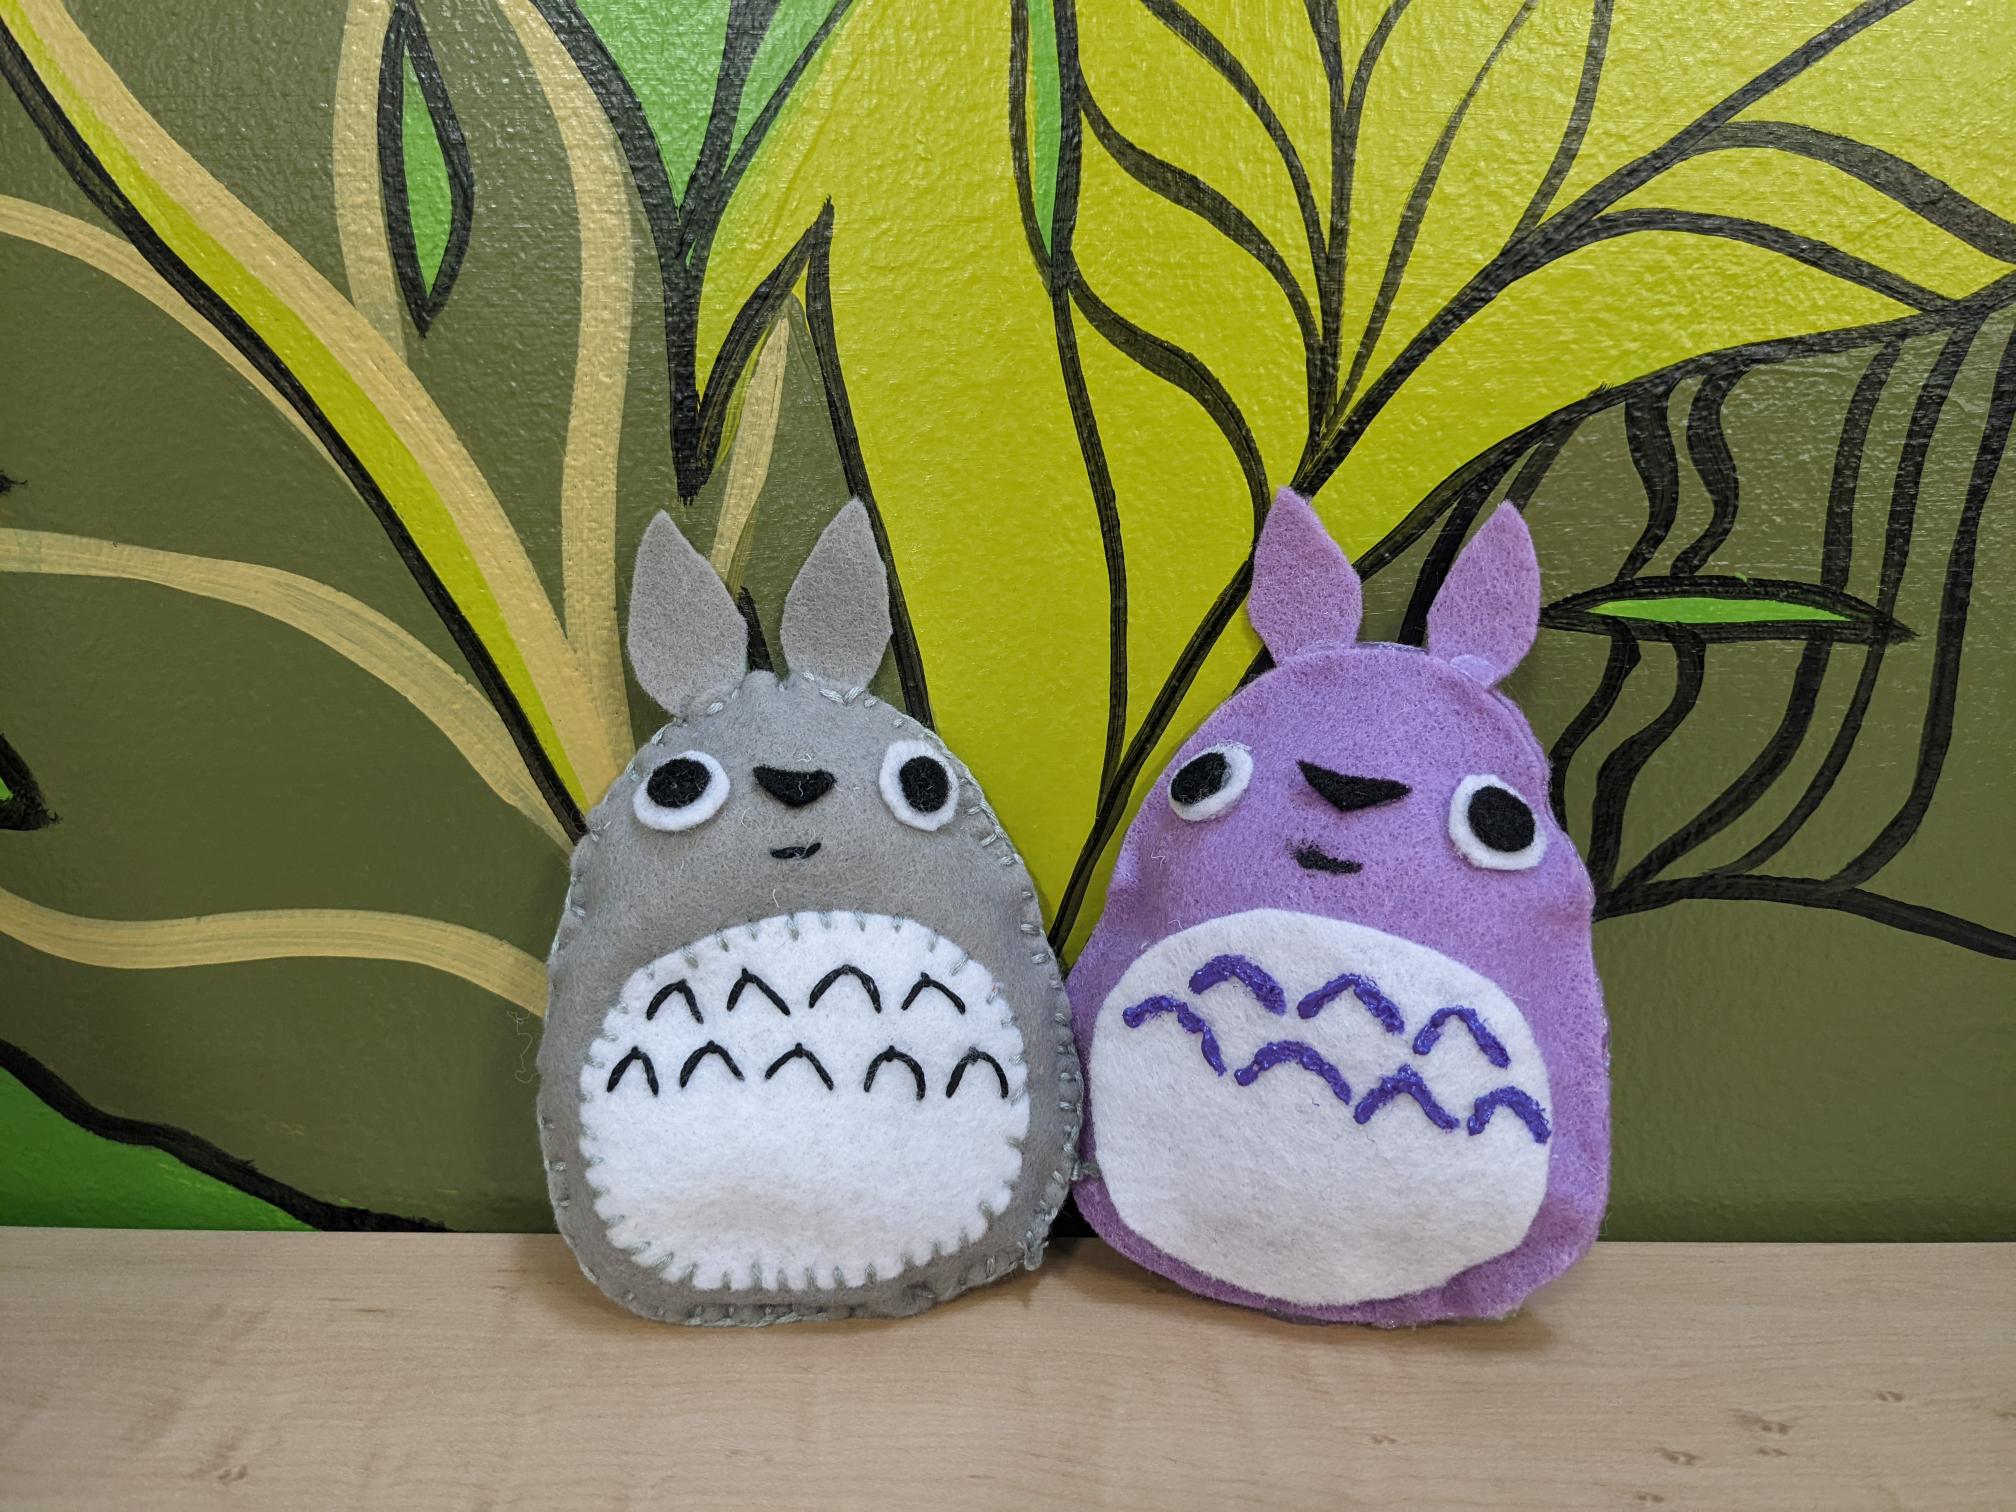 Gray Totoro feltie and lilac colored Totoro feltie against a green leafy background